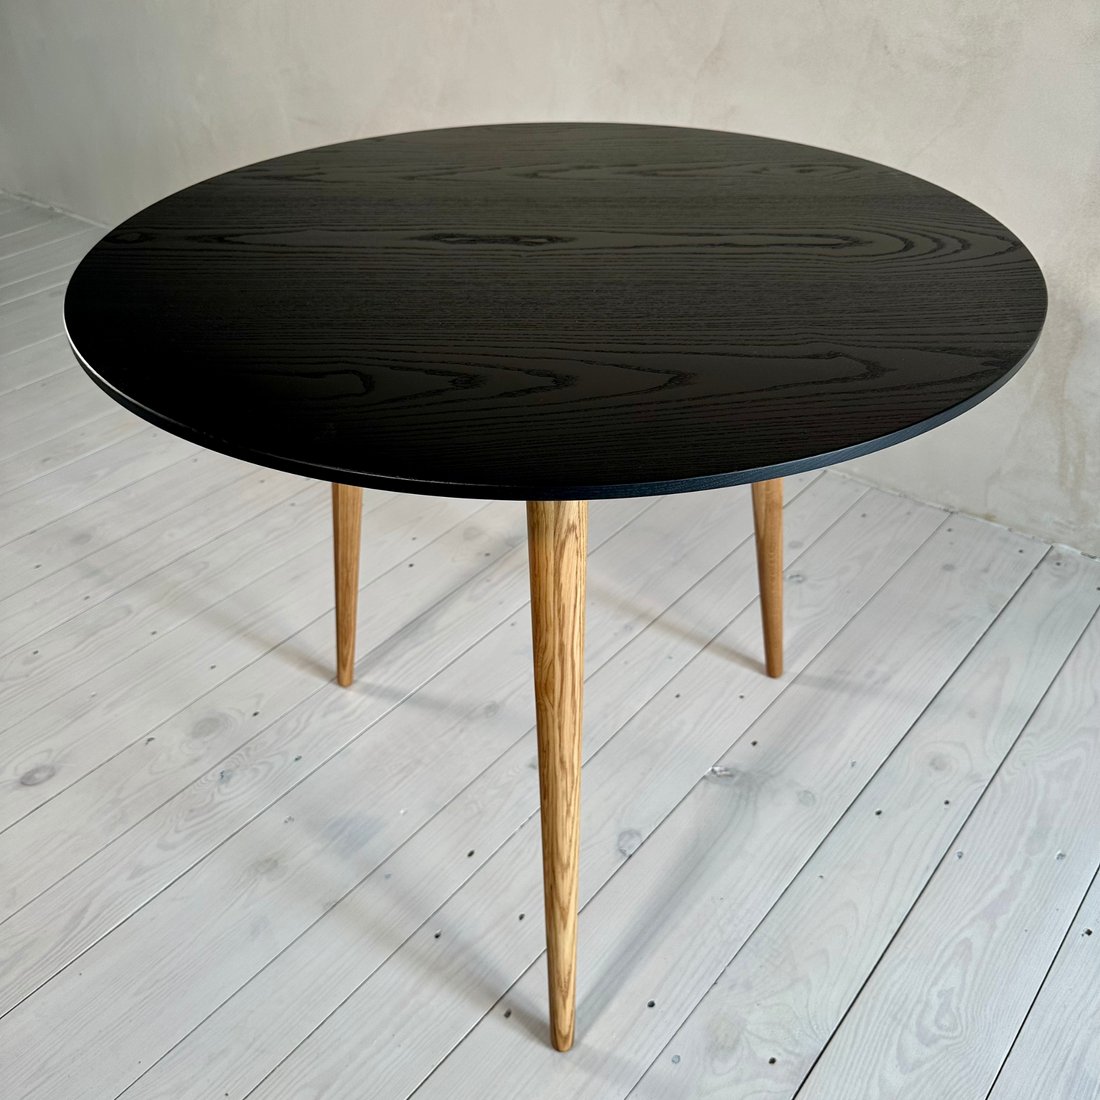  'Black Swan Limited' Round Ash Wood table - Wild Wood Factory